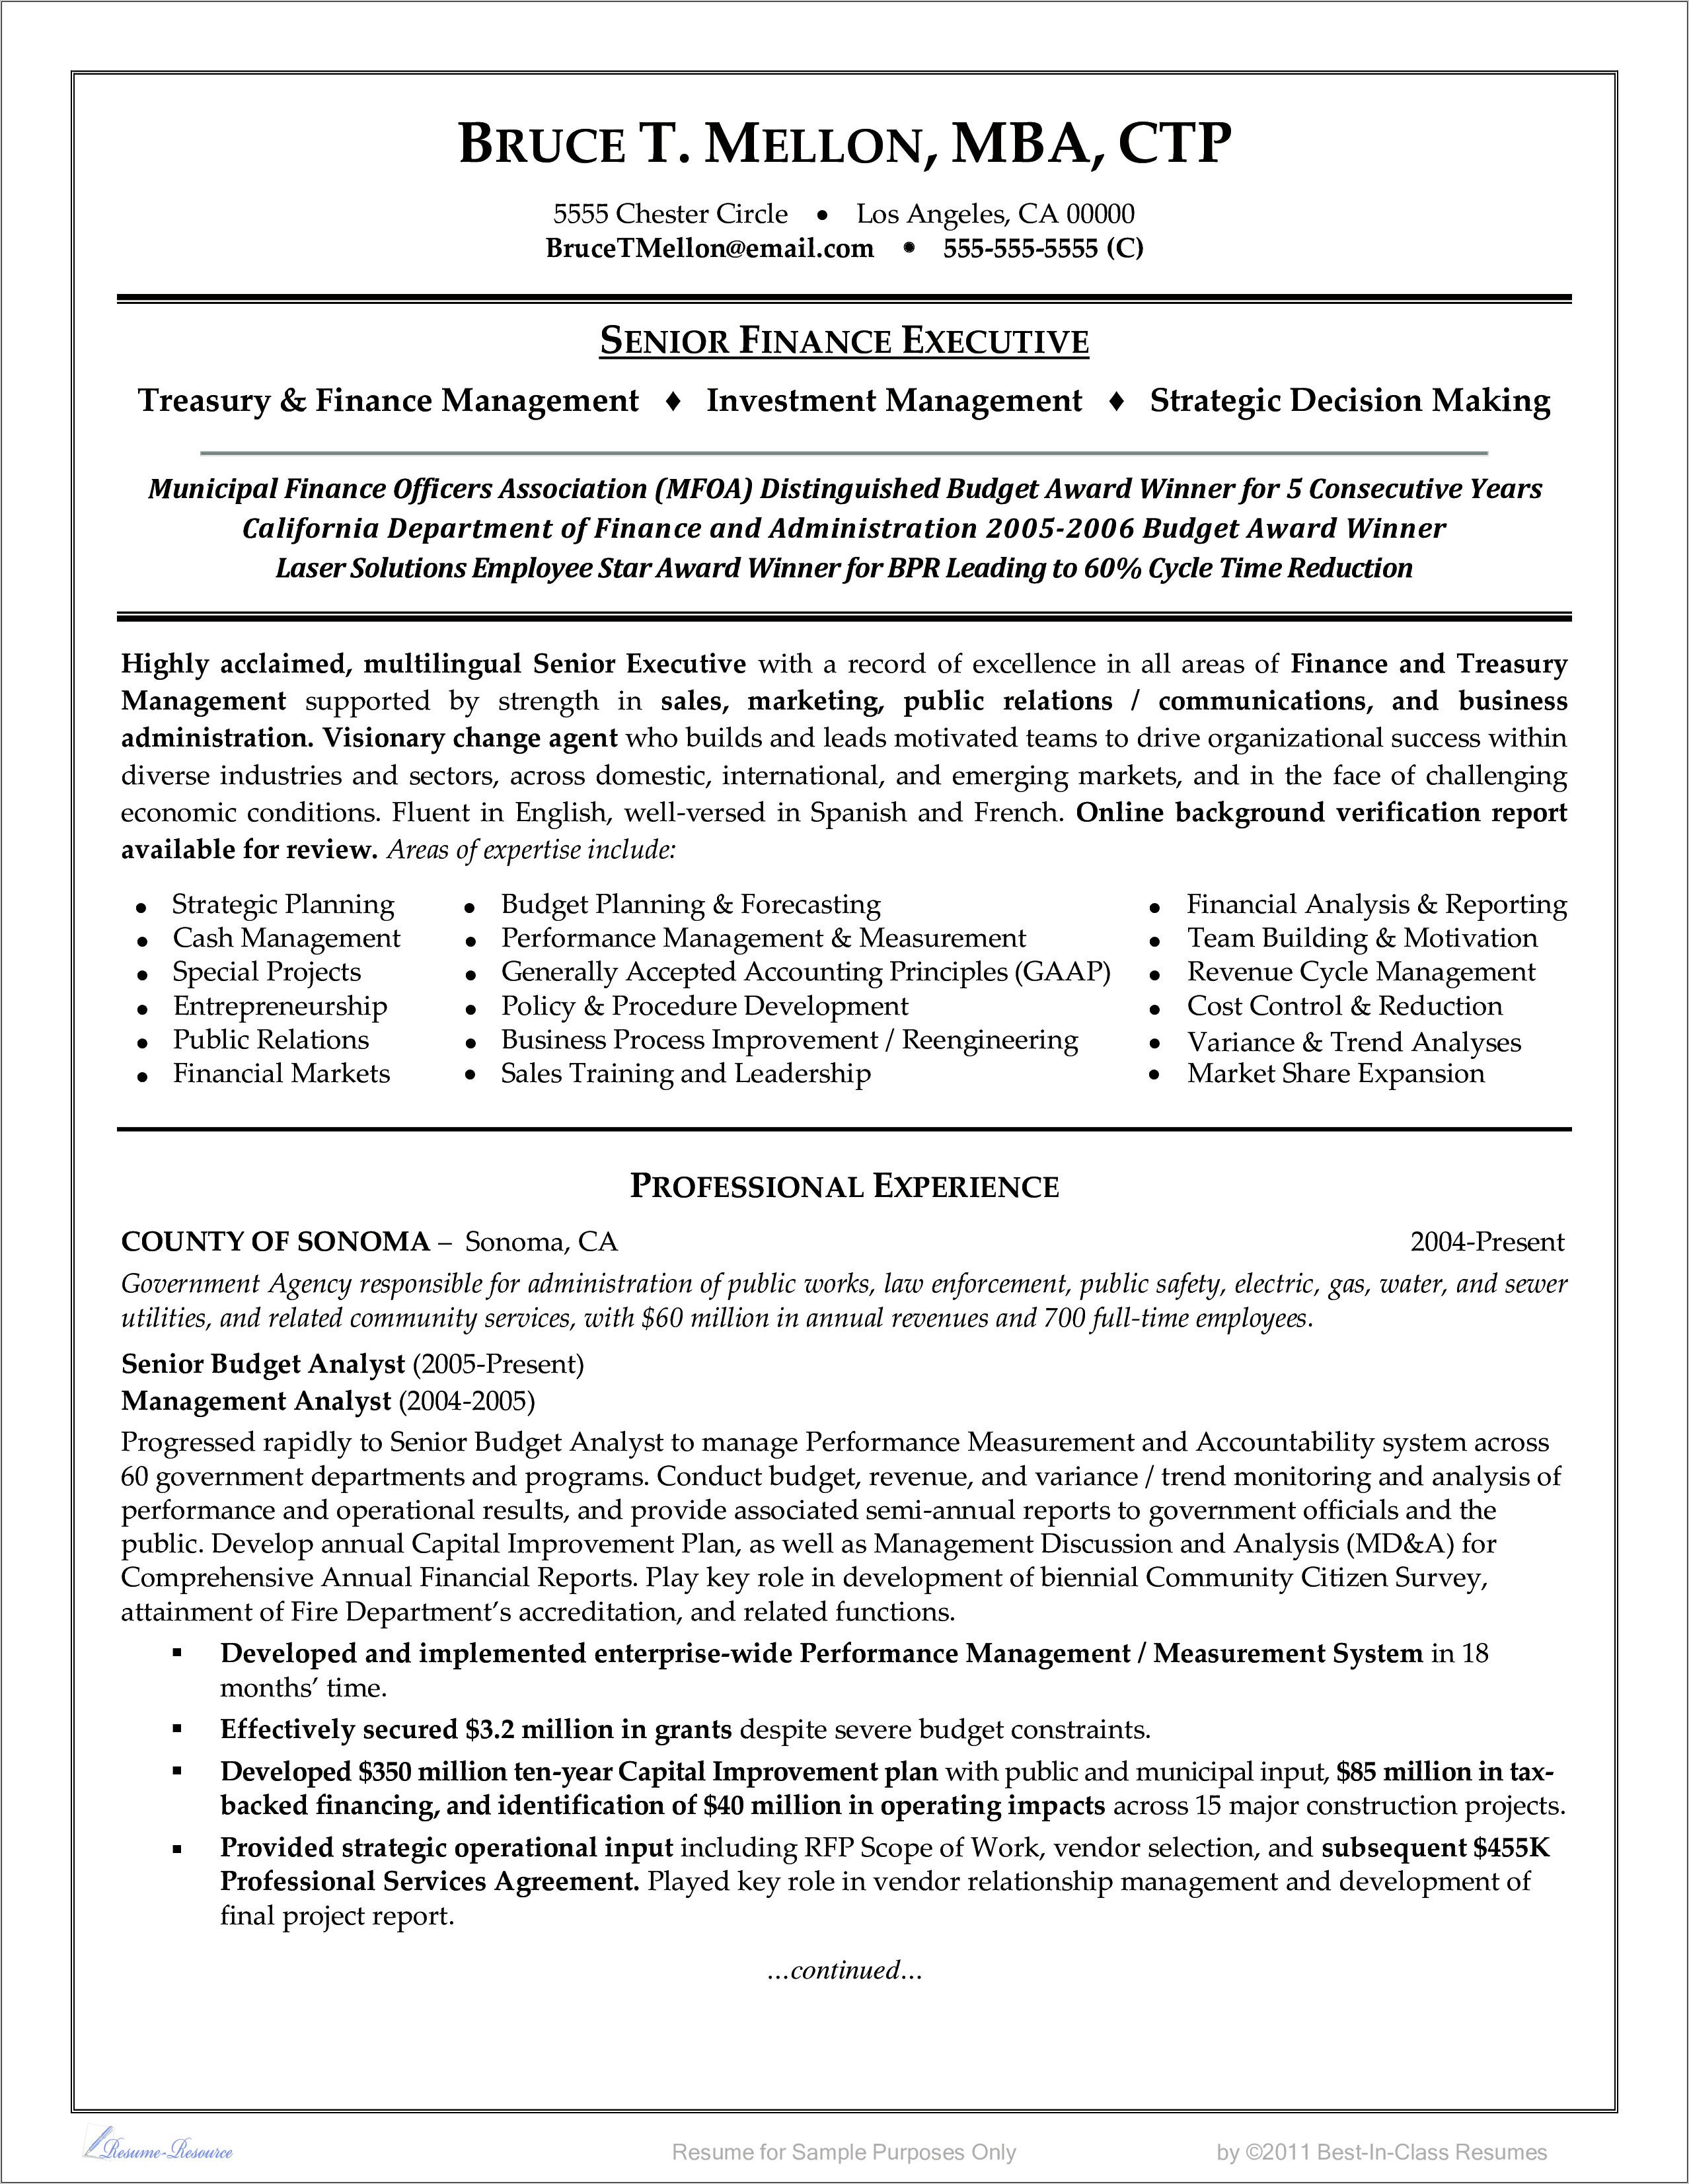 Sample Resumes For Managers And Executives